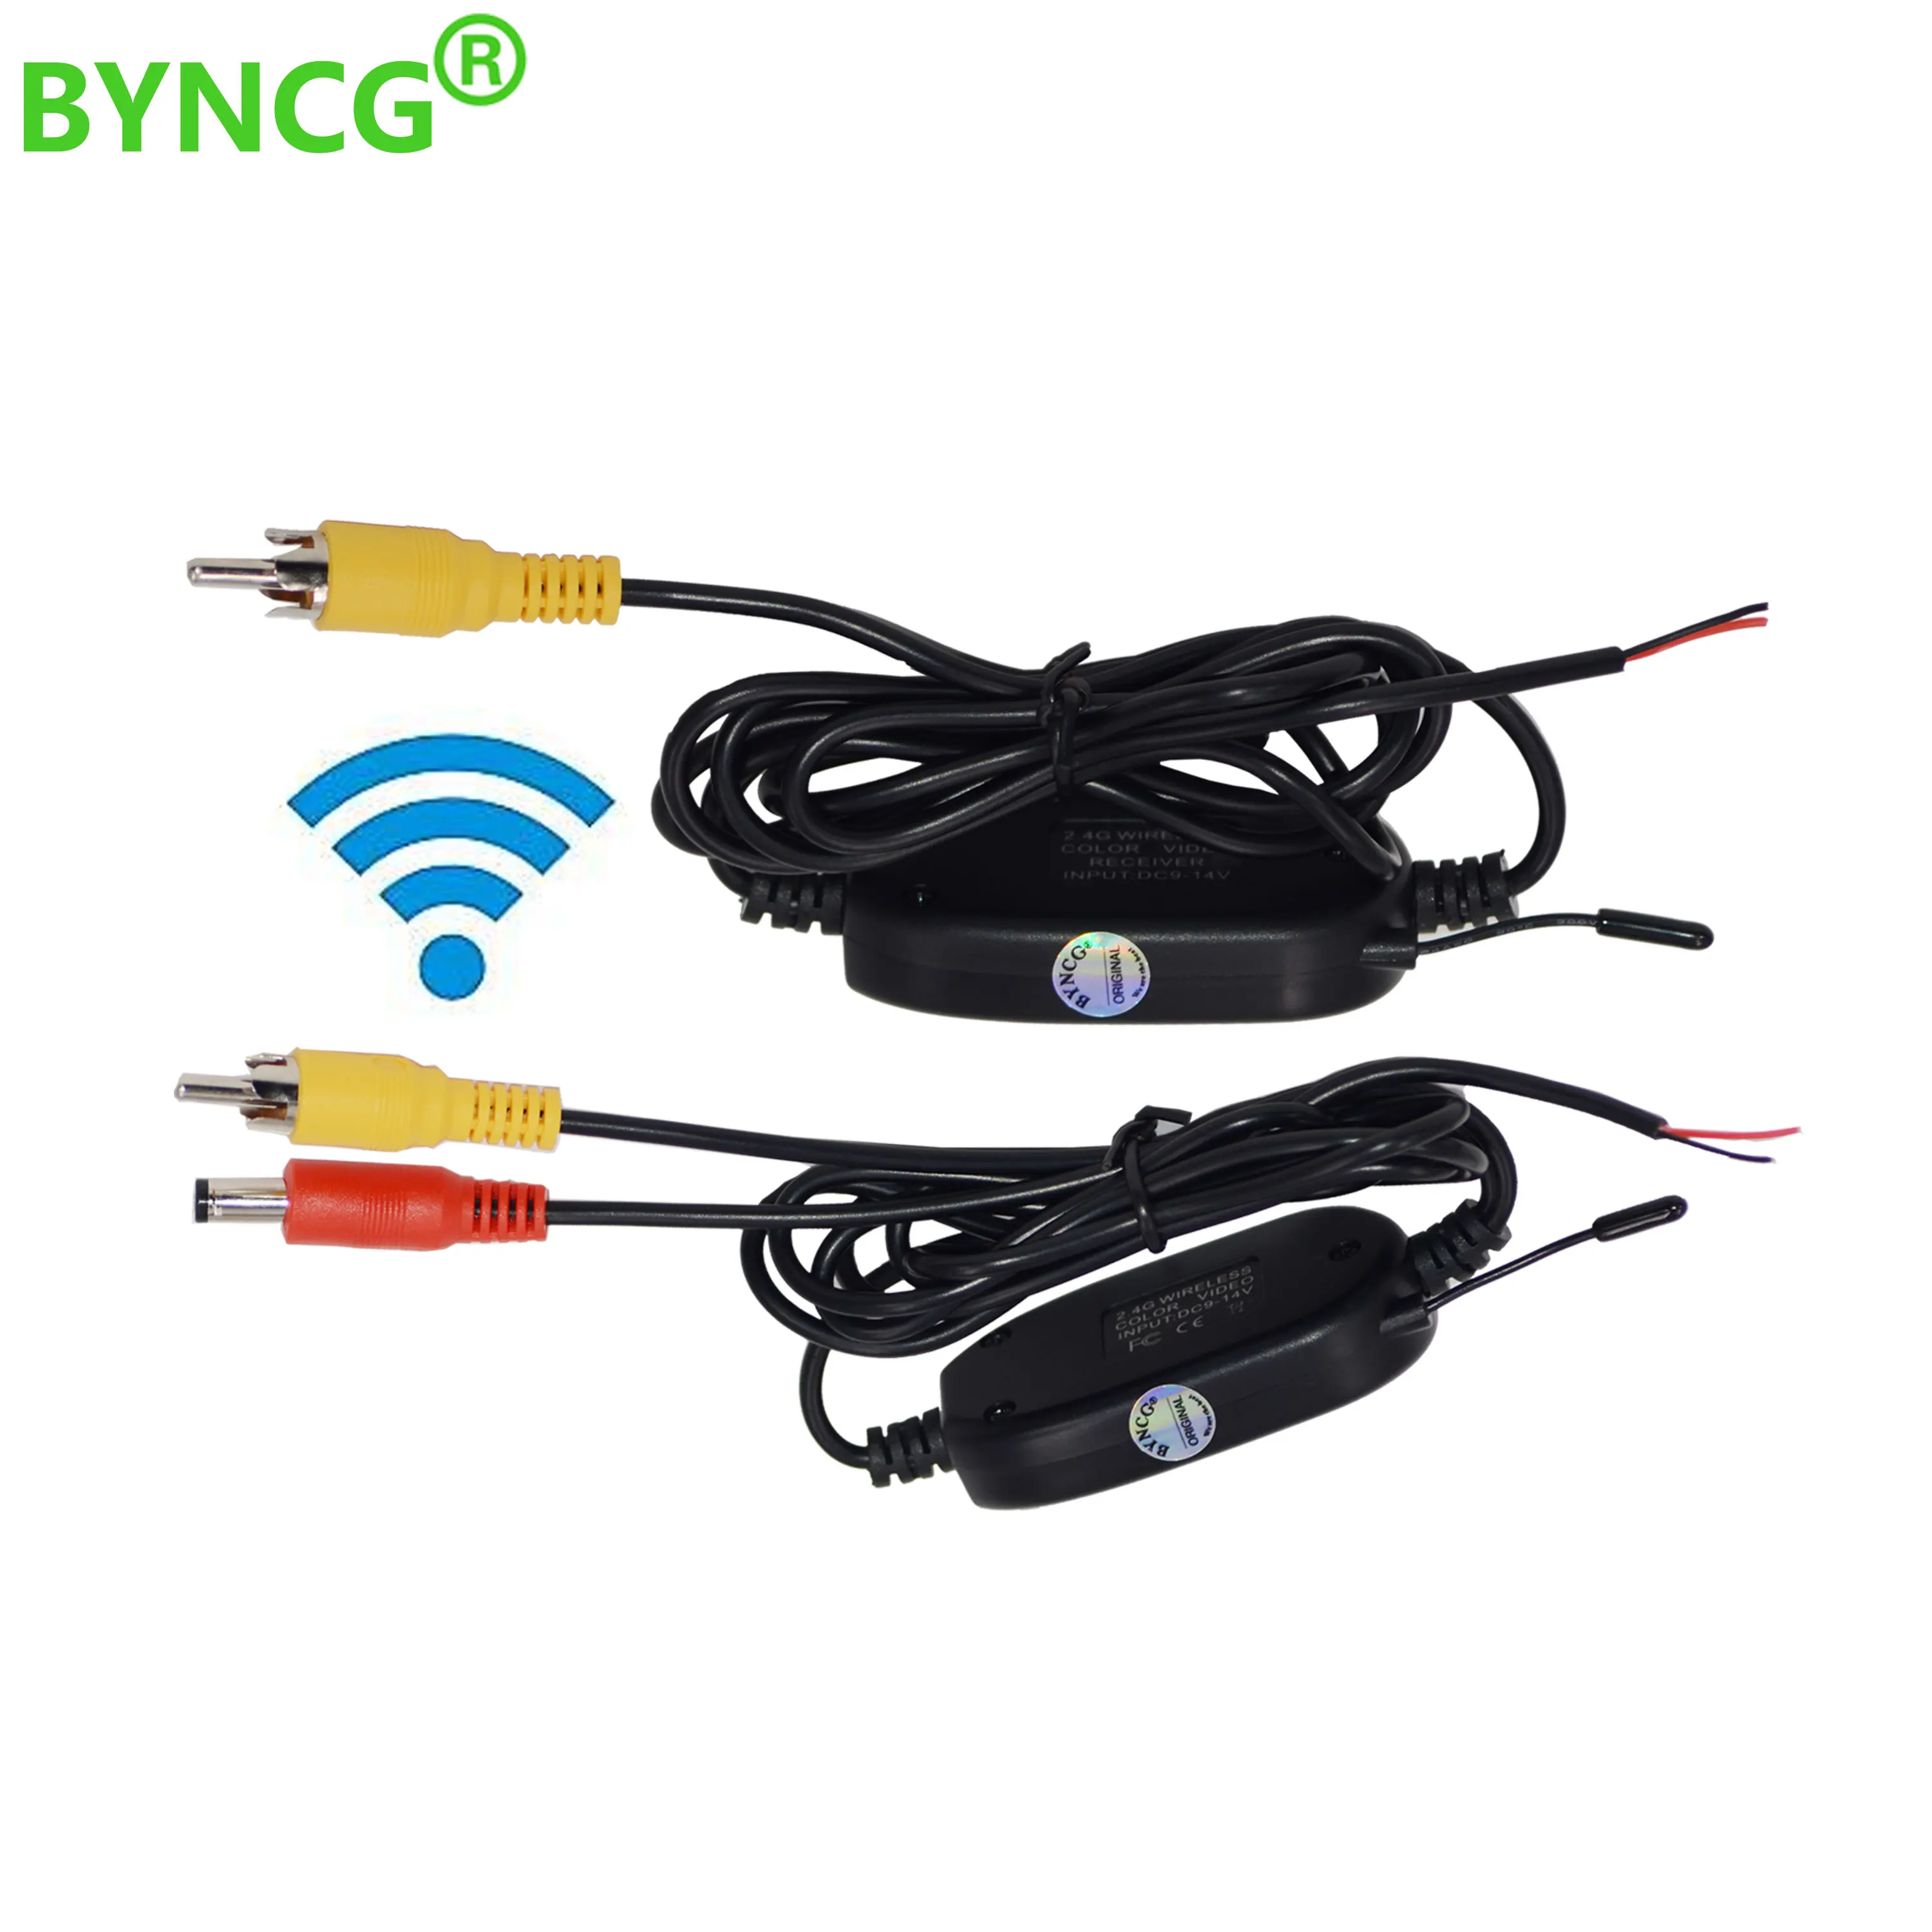 2.4 Ghz Wireless Rear View Camera RCA Video Transmitter & Receiver Kit for Car Rearview Monitor FM Transmitter & Receiver